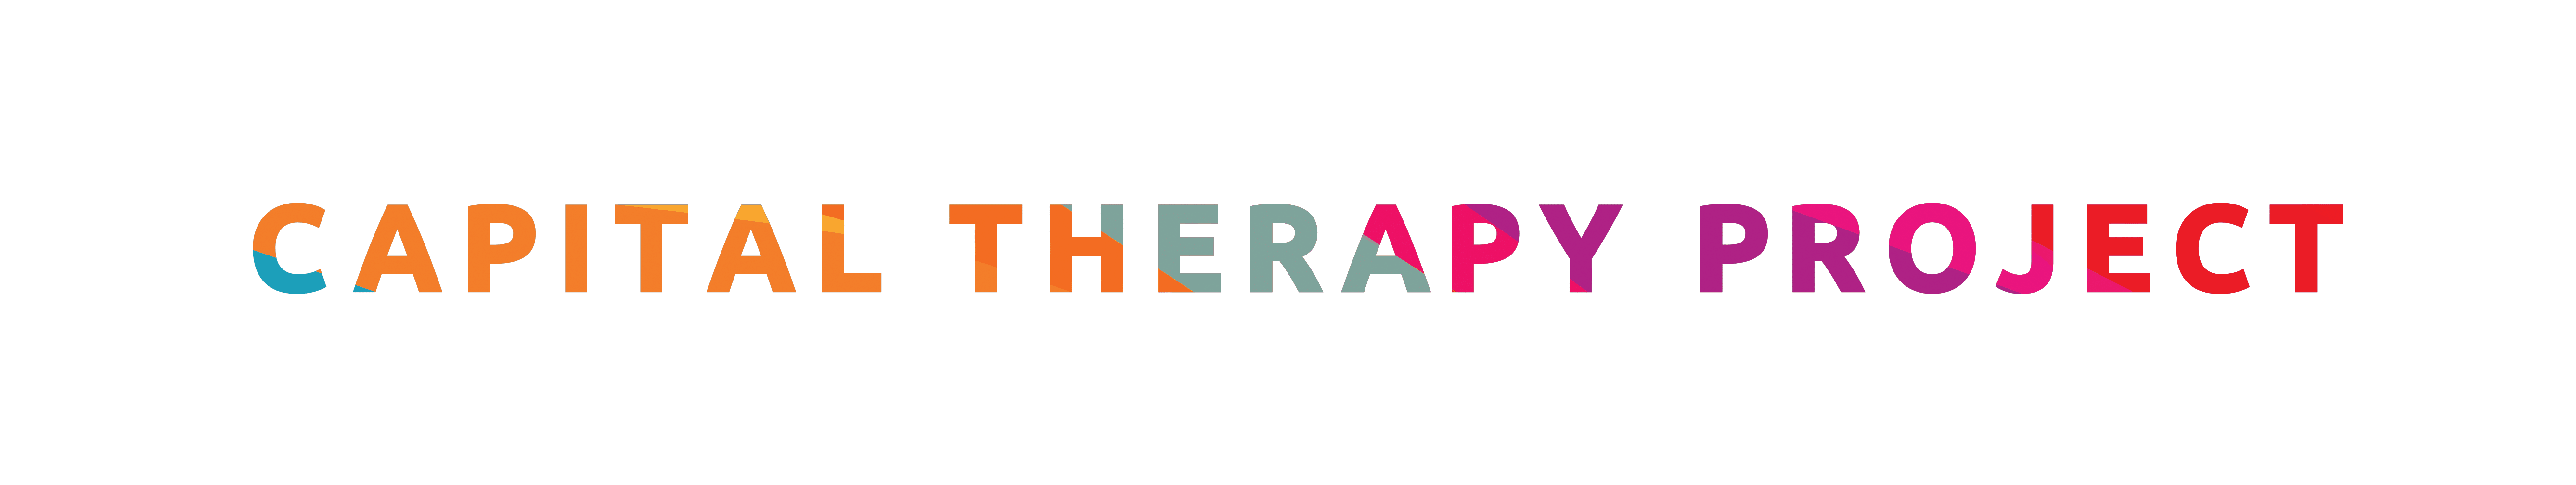 Capital Therapy Project Affordable Therapy in DC